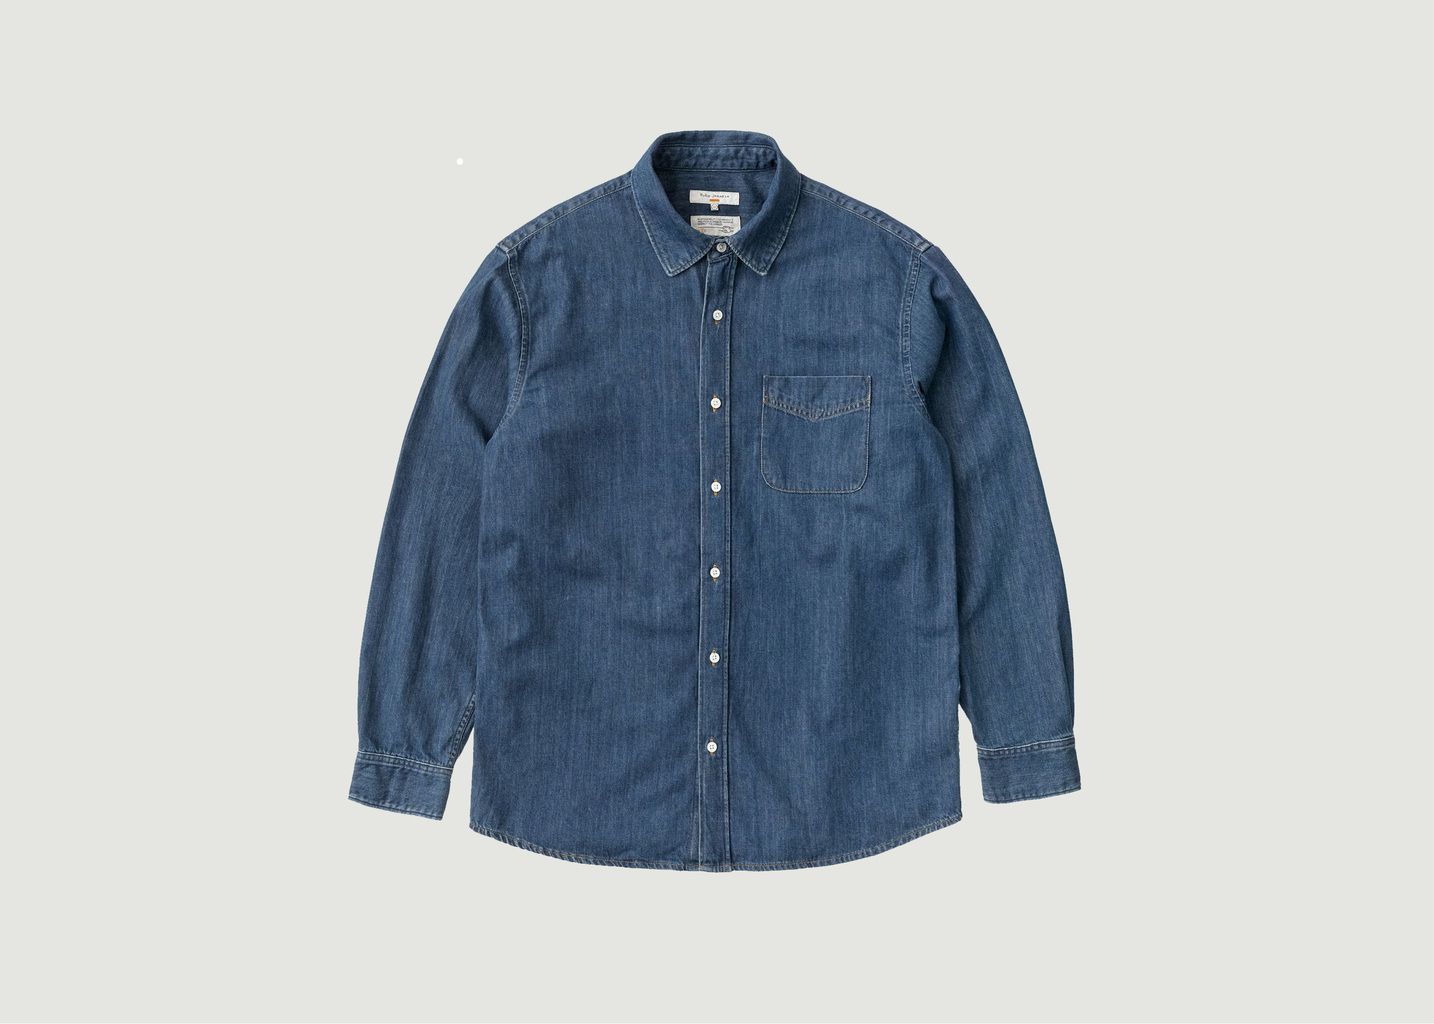 Nudie Jeans Casual Some Kind Of Blue Denim Shirt